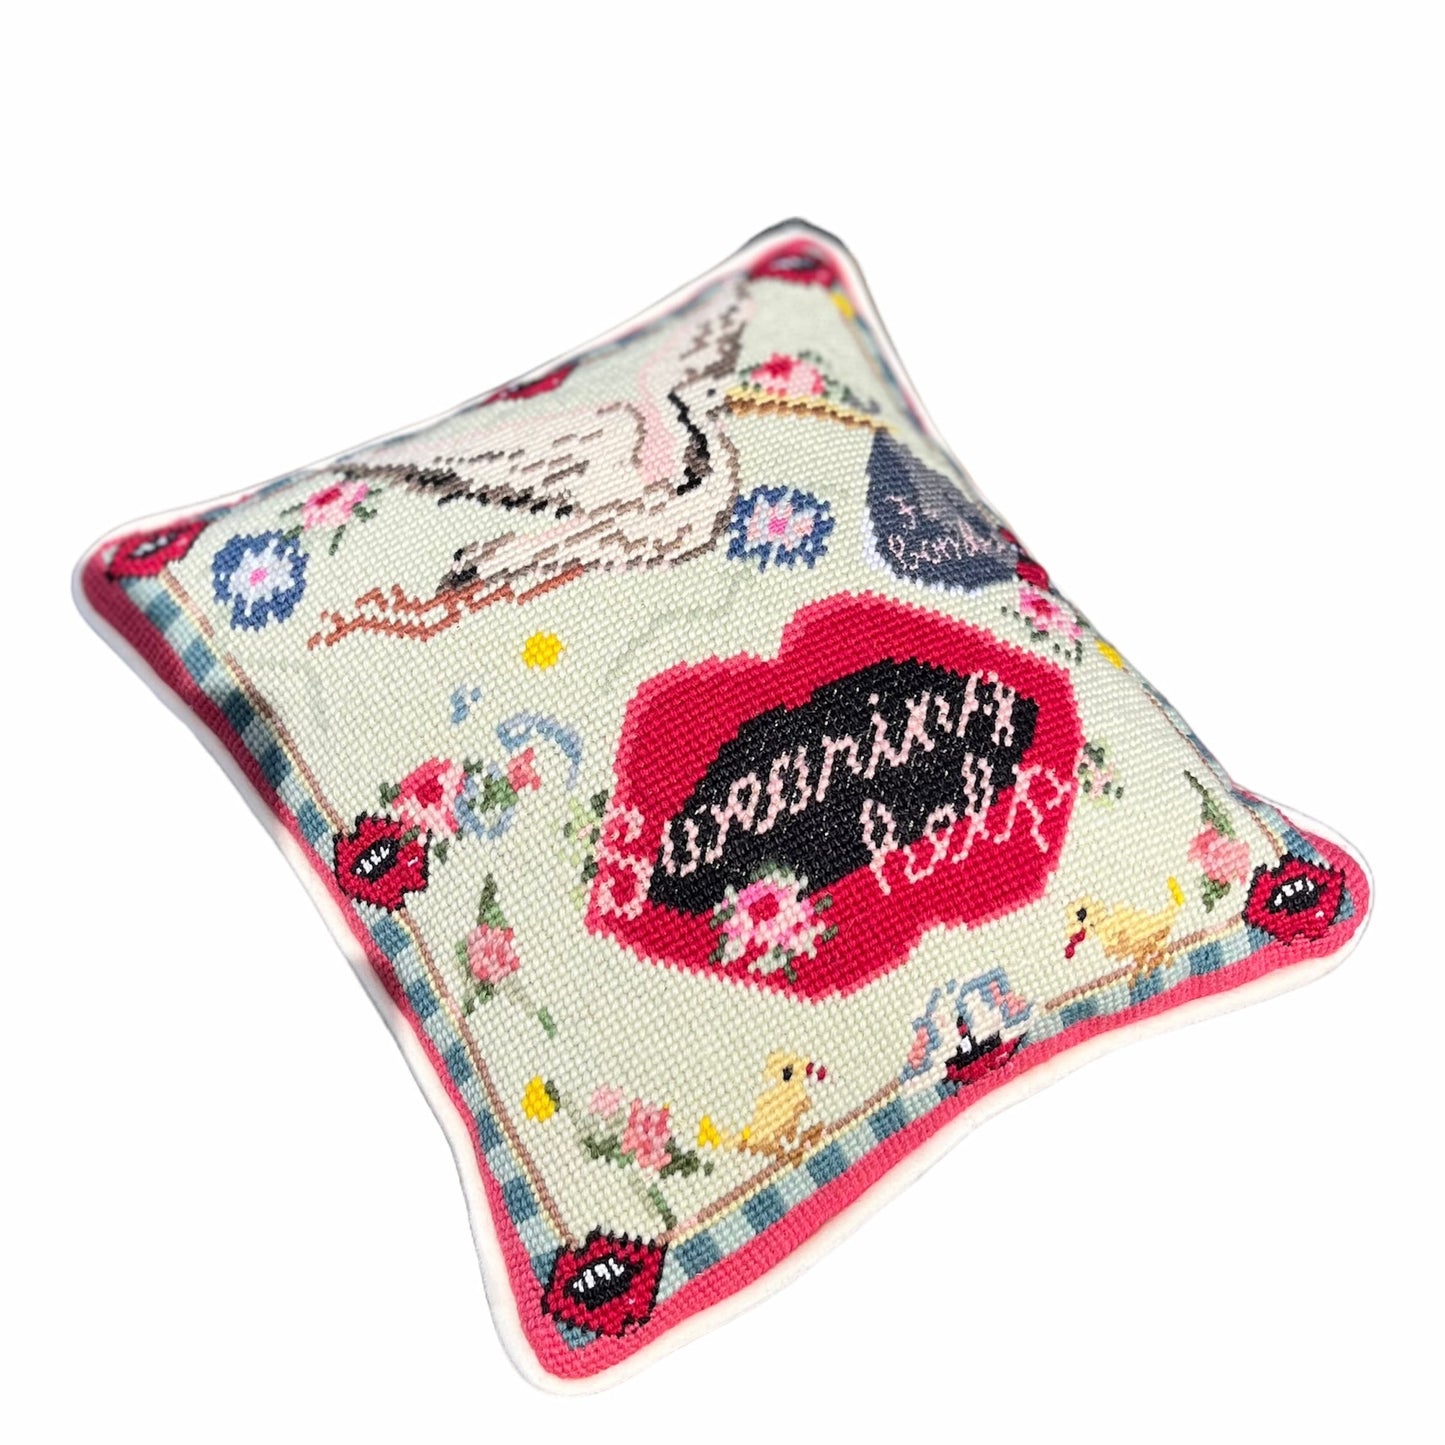 hand-embroidered needlepoint F-BOMB original pillow